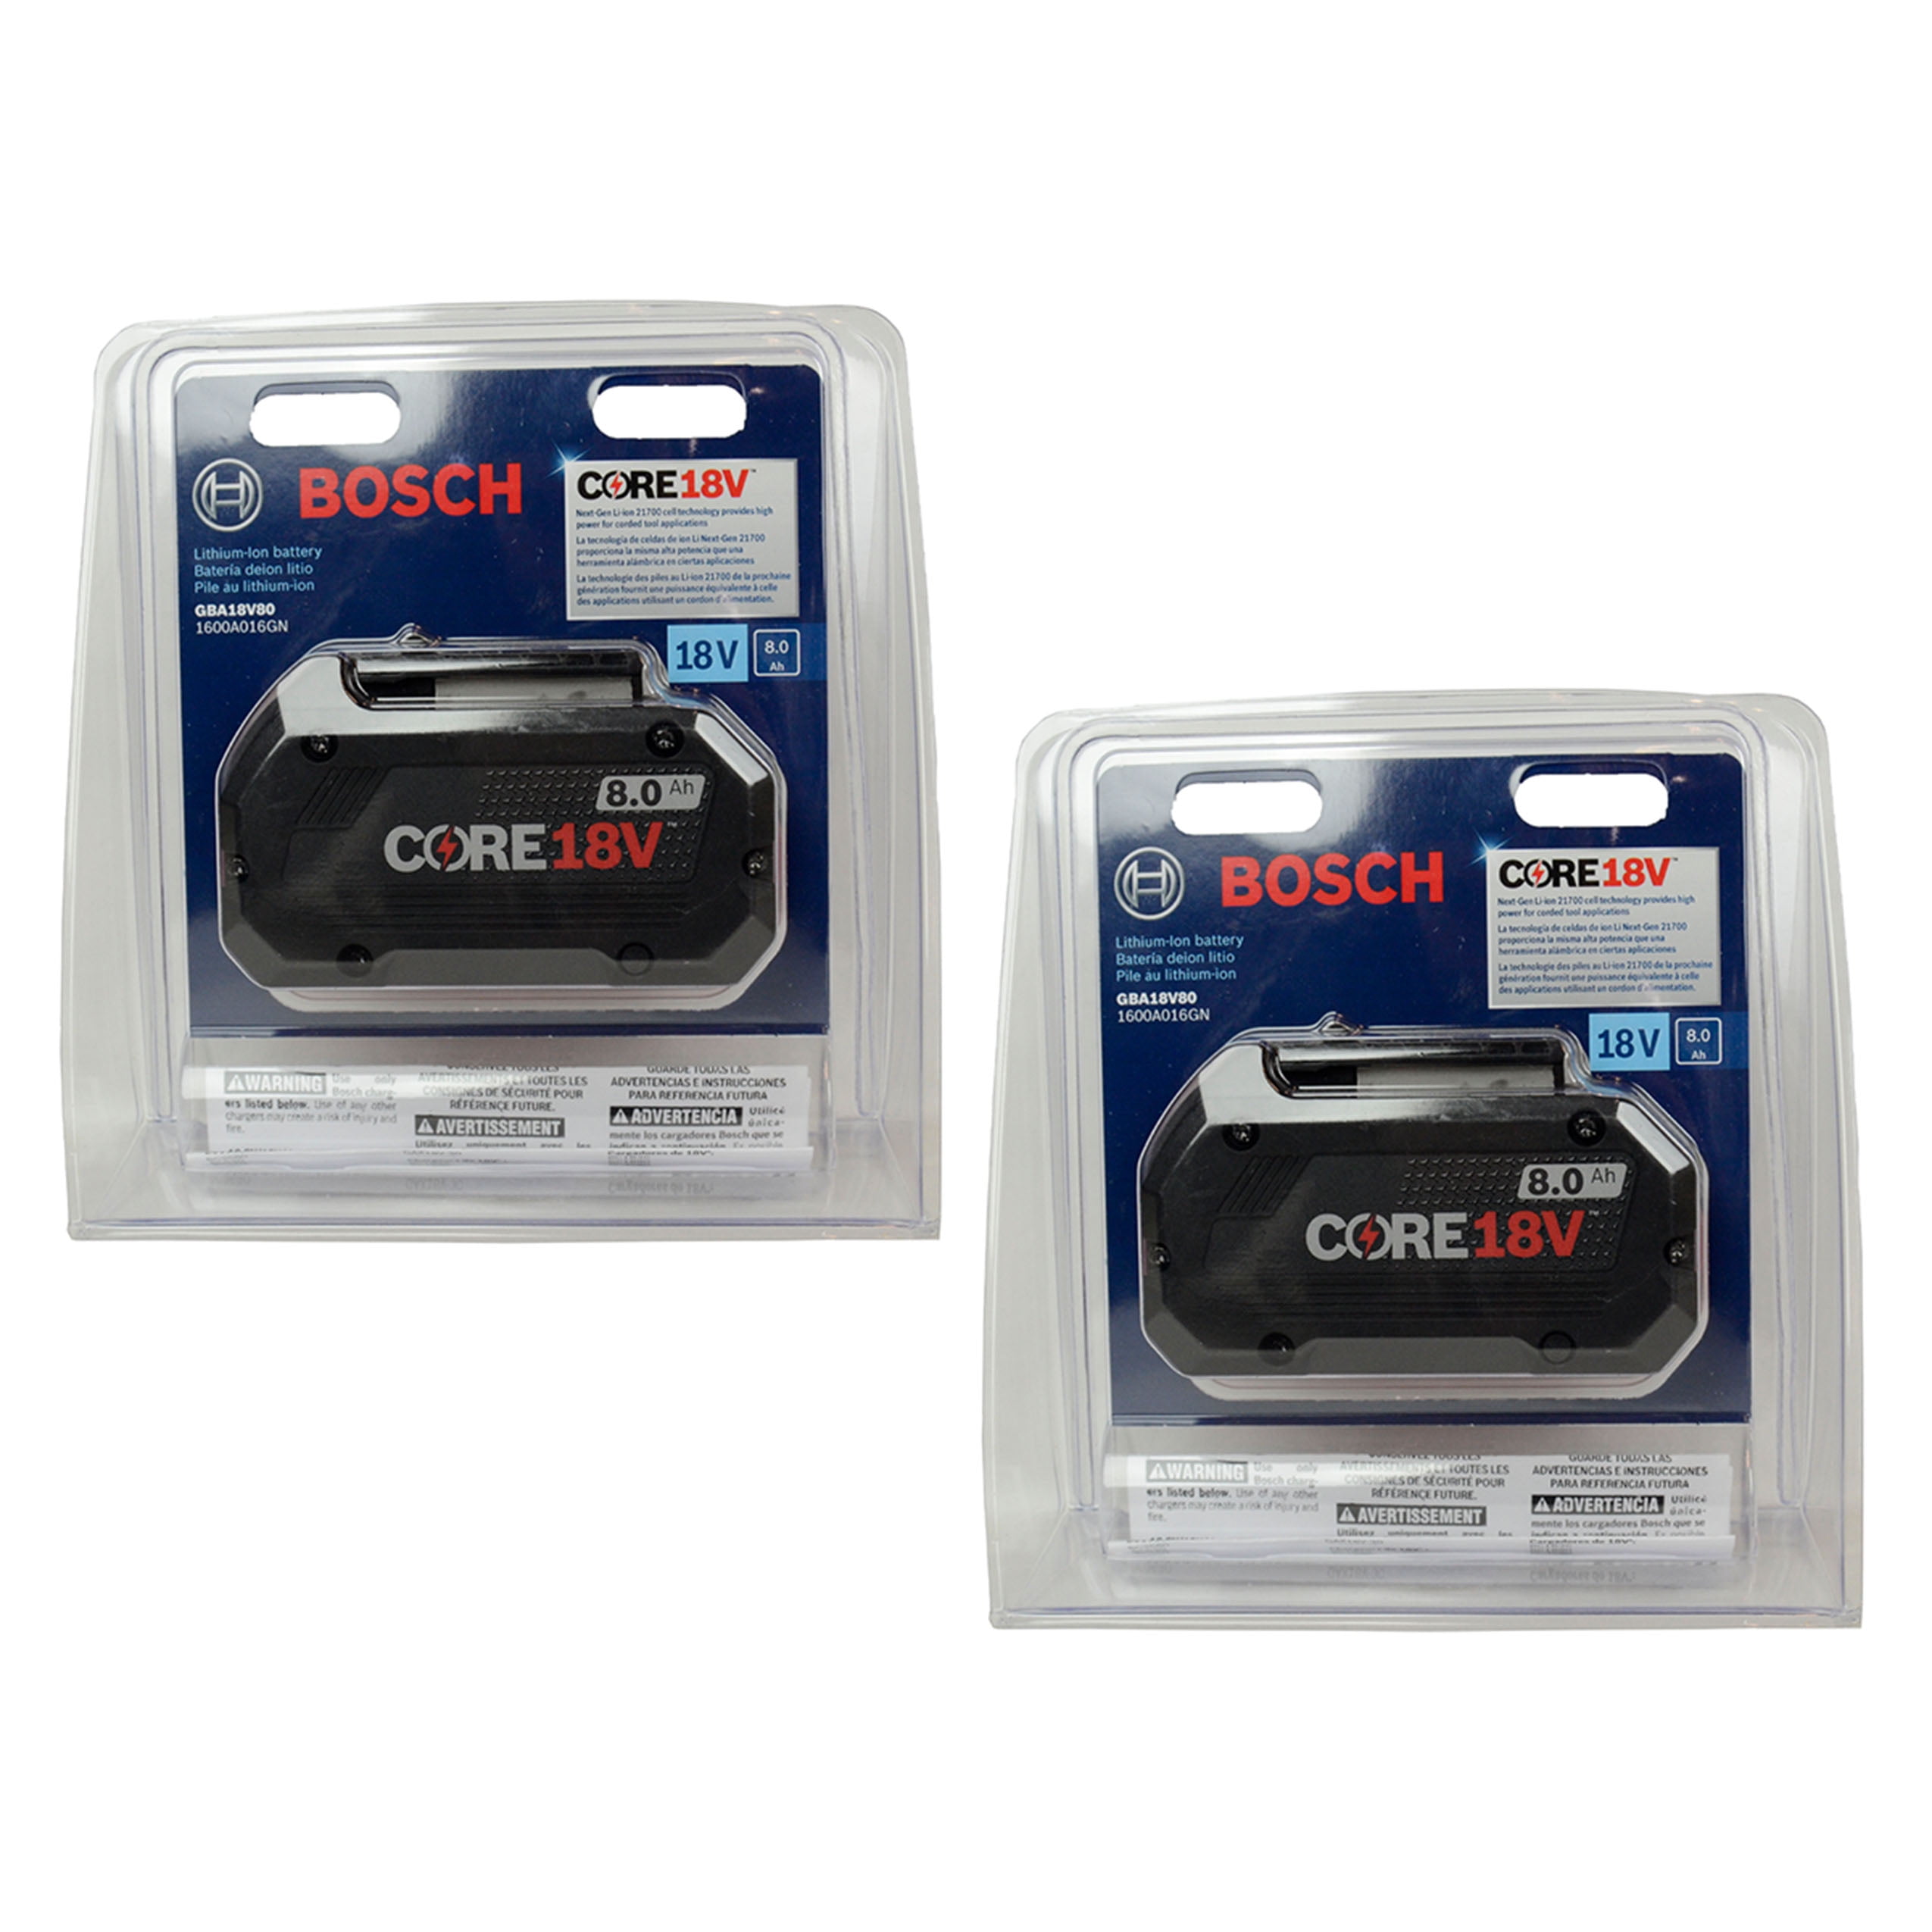 Bosch GBA18V80 Core 18V 8.0 Ah Lithium-ion Battery for sale online